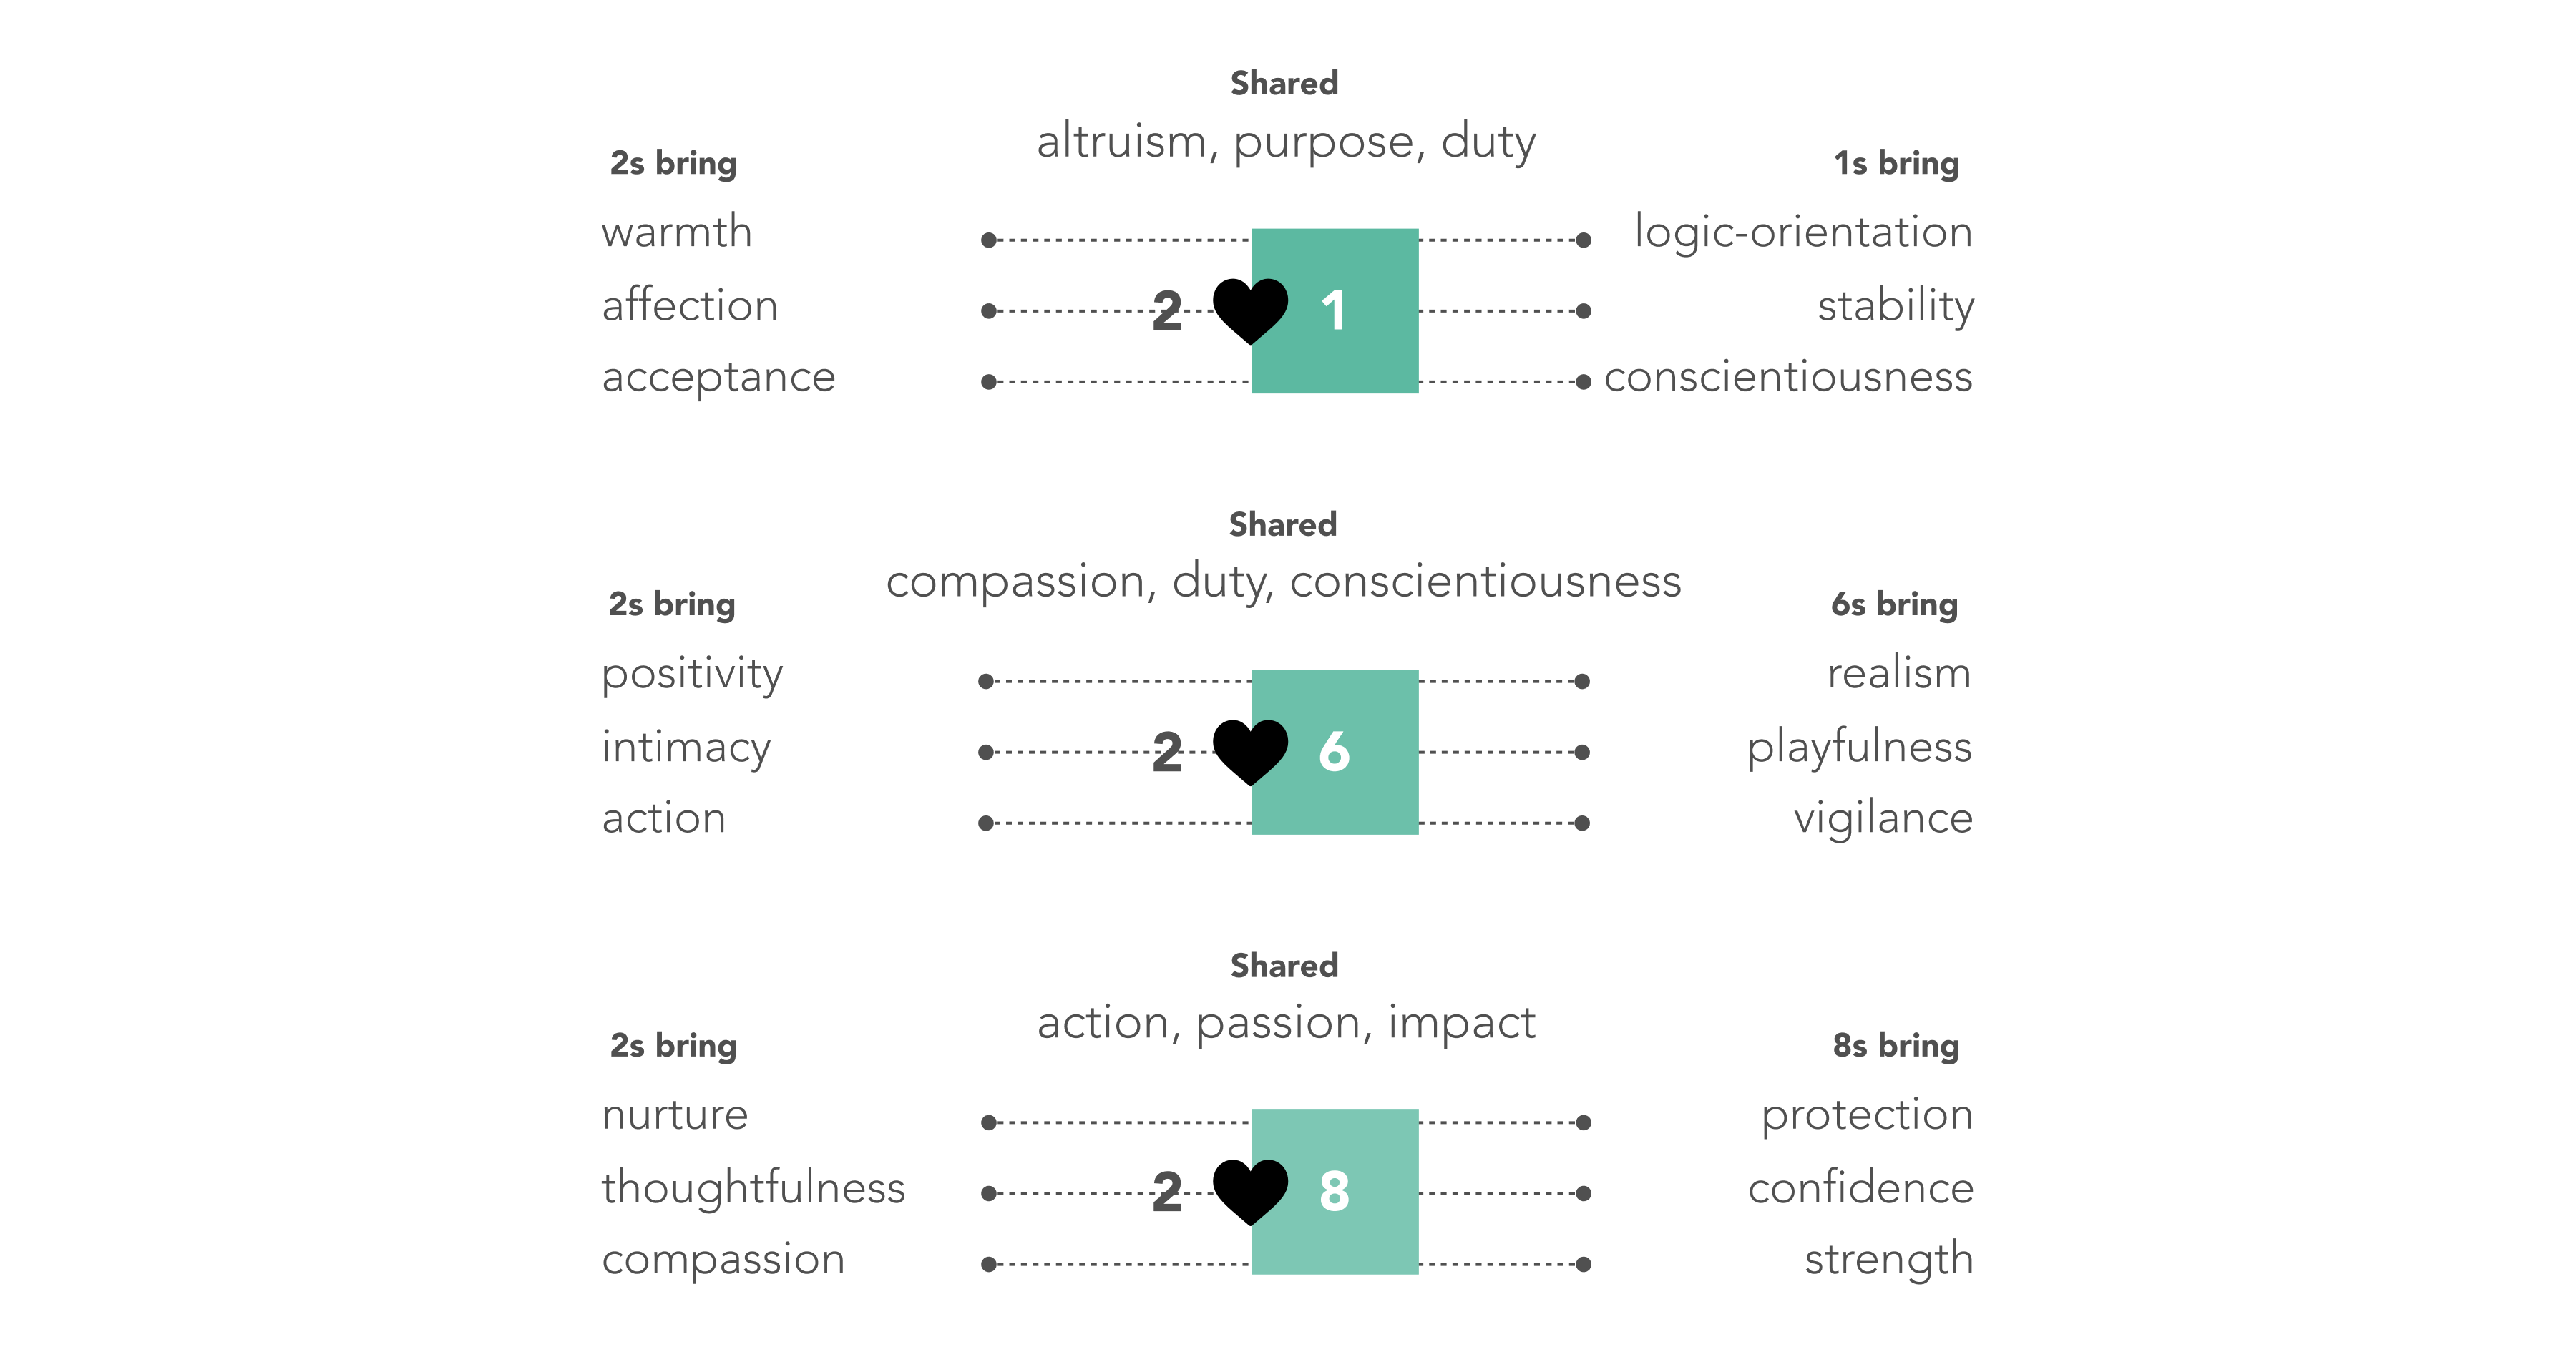 2s and 1s share altruism, purpose, duty. 2s bring warmth, affection, acceptance, while 1s bring logic-orientation, stability, conscientiousness. 2s and 6s share compassion, duty, conscientiousness. 2s bring positivity, intimacy, action, while 6s bring realism, playfulness, vigilance. 2s and 8s share action, passion, impact. 2s bring nurture, thoughtfulness, compassion, while 8s bring protection, confidence, strength.